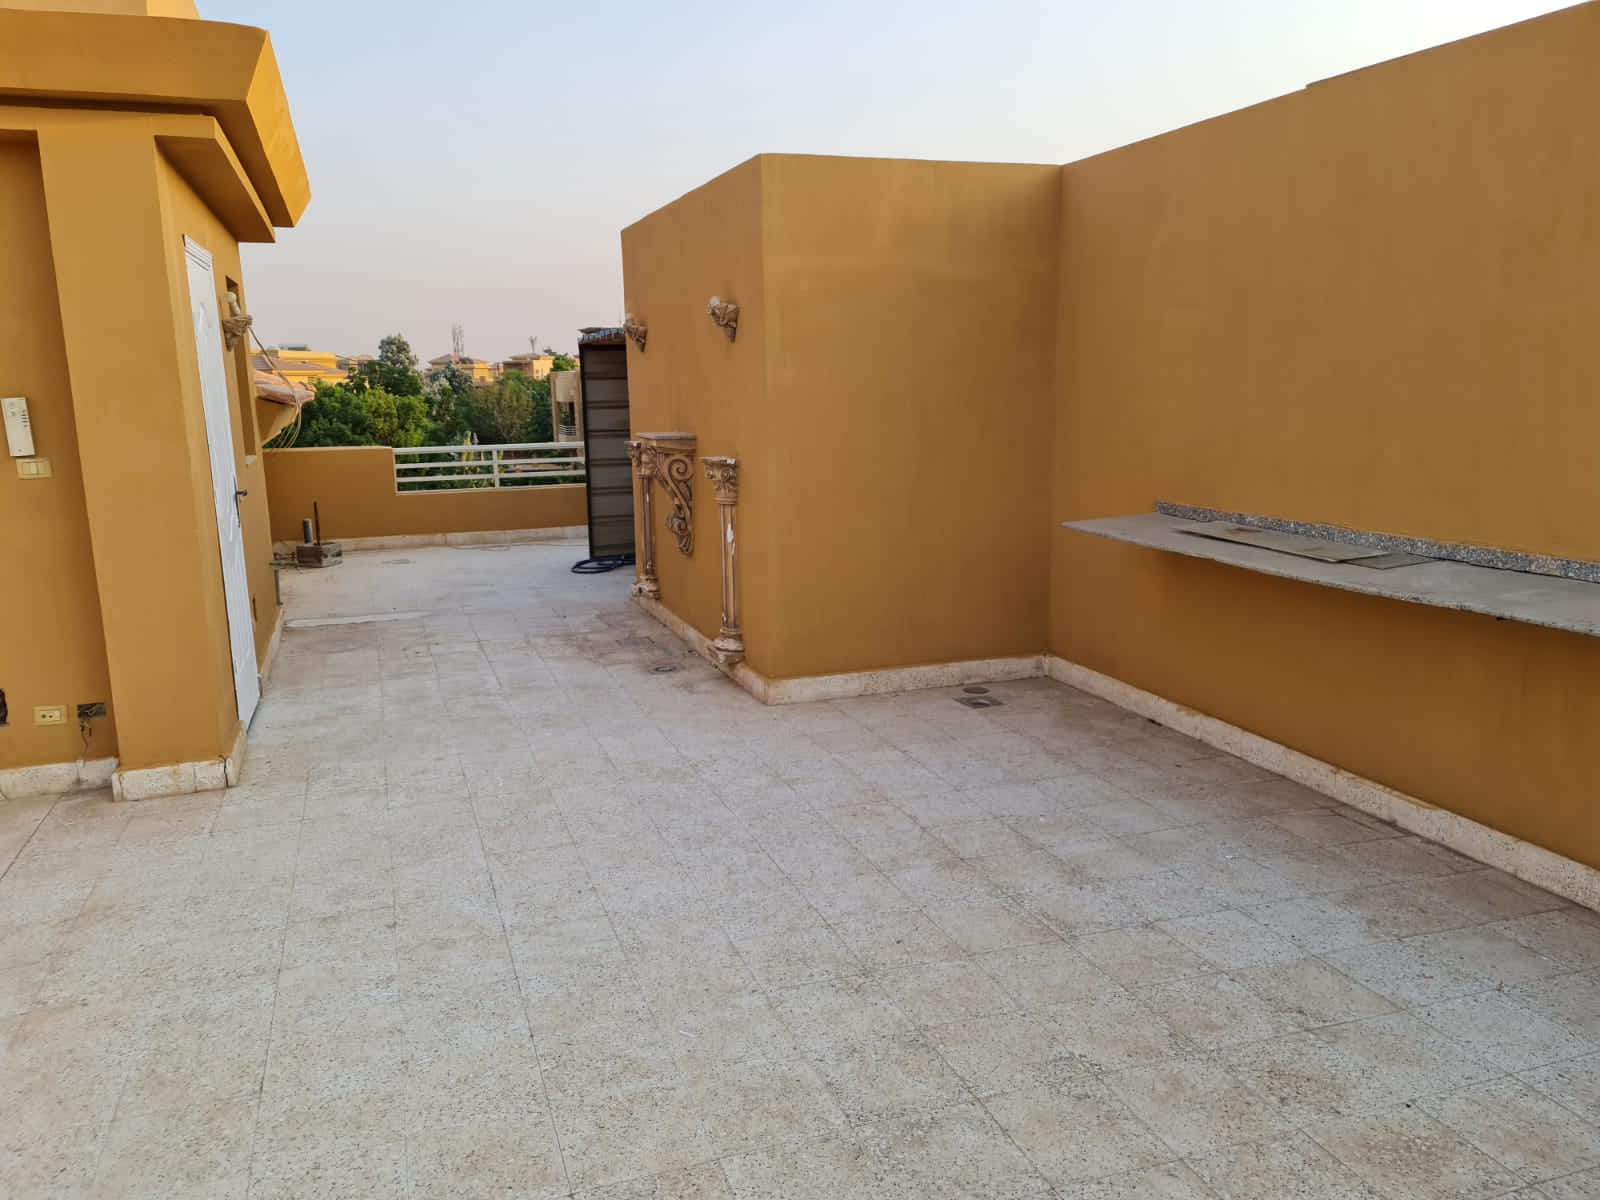 Townhouse 245m for sale in Jeera Zayed Prime Location

Land area: 245 meters - Building area: 250 meters
Permit to build a floor in the roof

Location: Jeera - Sheikh Zayed

Number of rooms: 3 rooms - 4 bathrooms - kitchen -3 reception
And a living room that should be a fourth room - Jacuzzi

Prime Location - Fully Finished Without Furniture - Garage

Price: 6.500.000
 Including a maintenance deposit club subscription

For more details, call: 01010742702

Jeera Compound on an area of ​​60 acres in Sheikh Zayed, Jeera welcomes you to your new home with a built-up area of ​​only 15% surrounded by lush greenery and cascading water bodies. With a wide range of living spaces, Jeera caters to every inhabitant, offering luxury villas, townhouses and twin houses. Moreover, Jeera offers those who are looking for indulgence and peace of mind; State-of-the-art spa, gymnasium, restaurants, swimming pools, kids area. Above all, Jeera respectfully embraces the rules of green architecture, natural, non-toxic and eco-friendly material